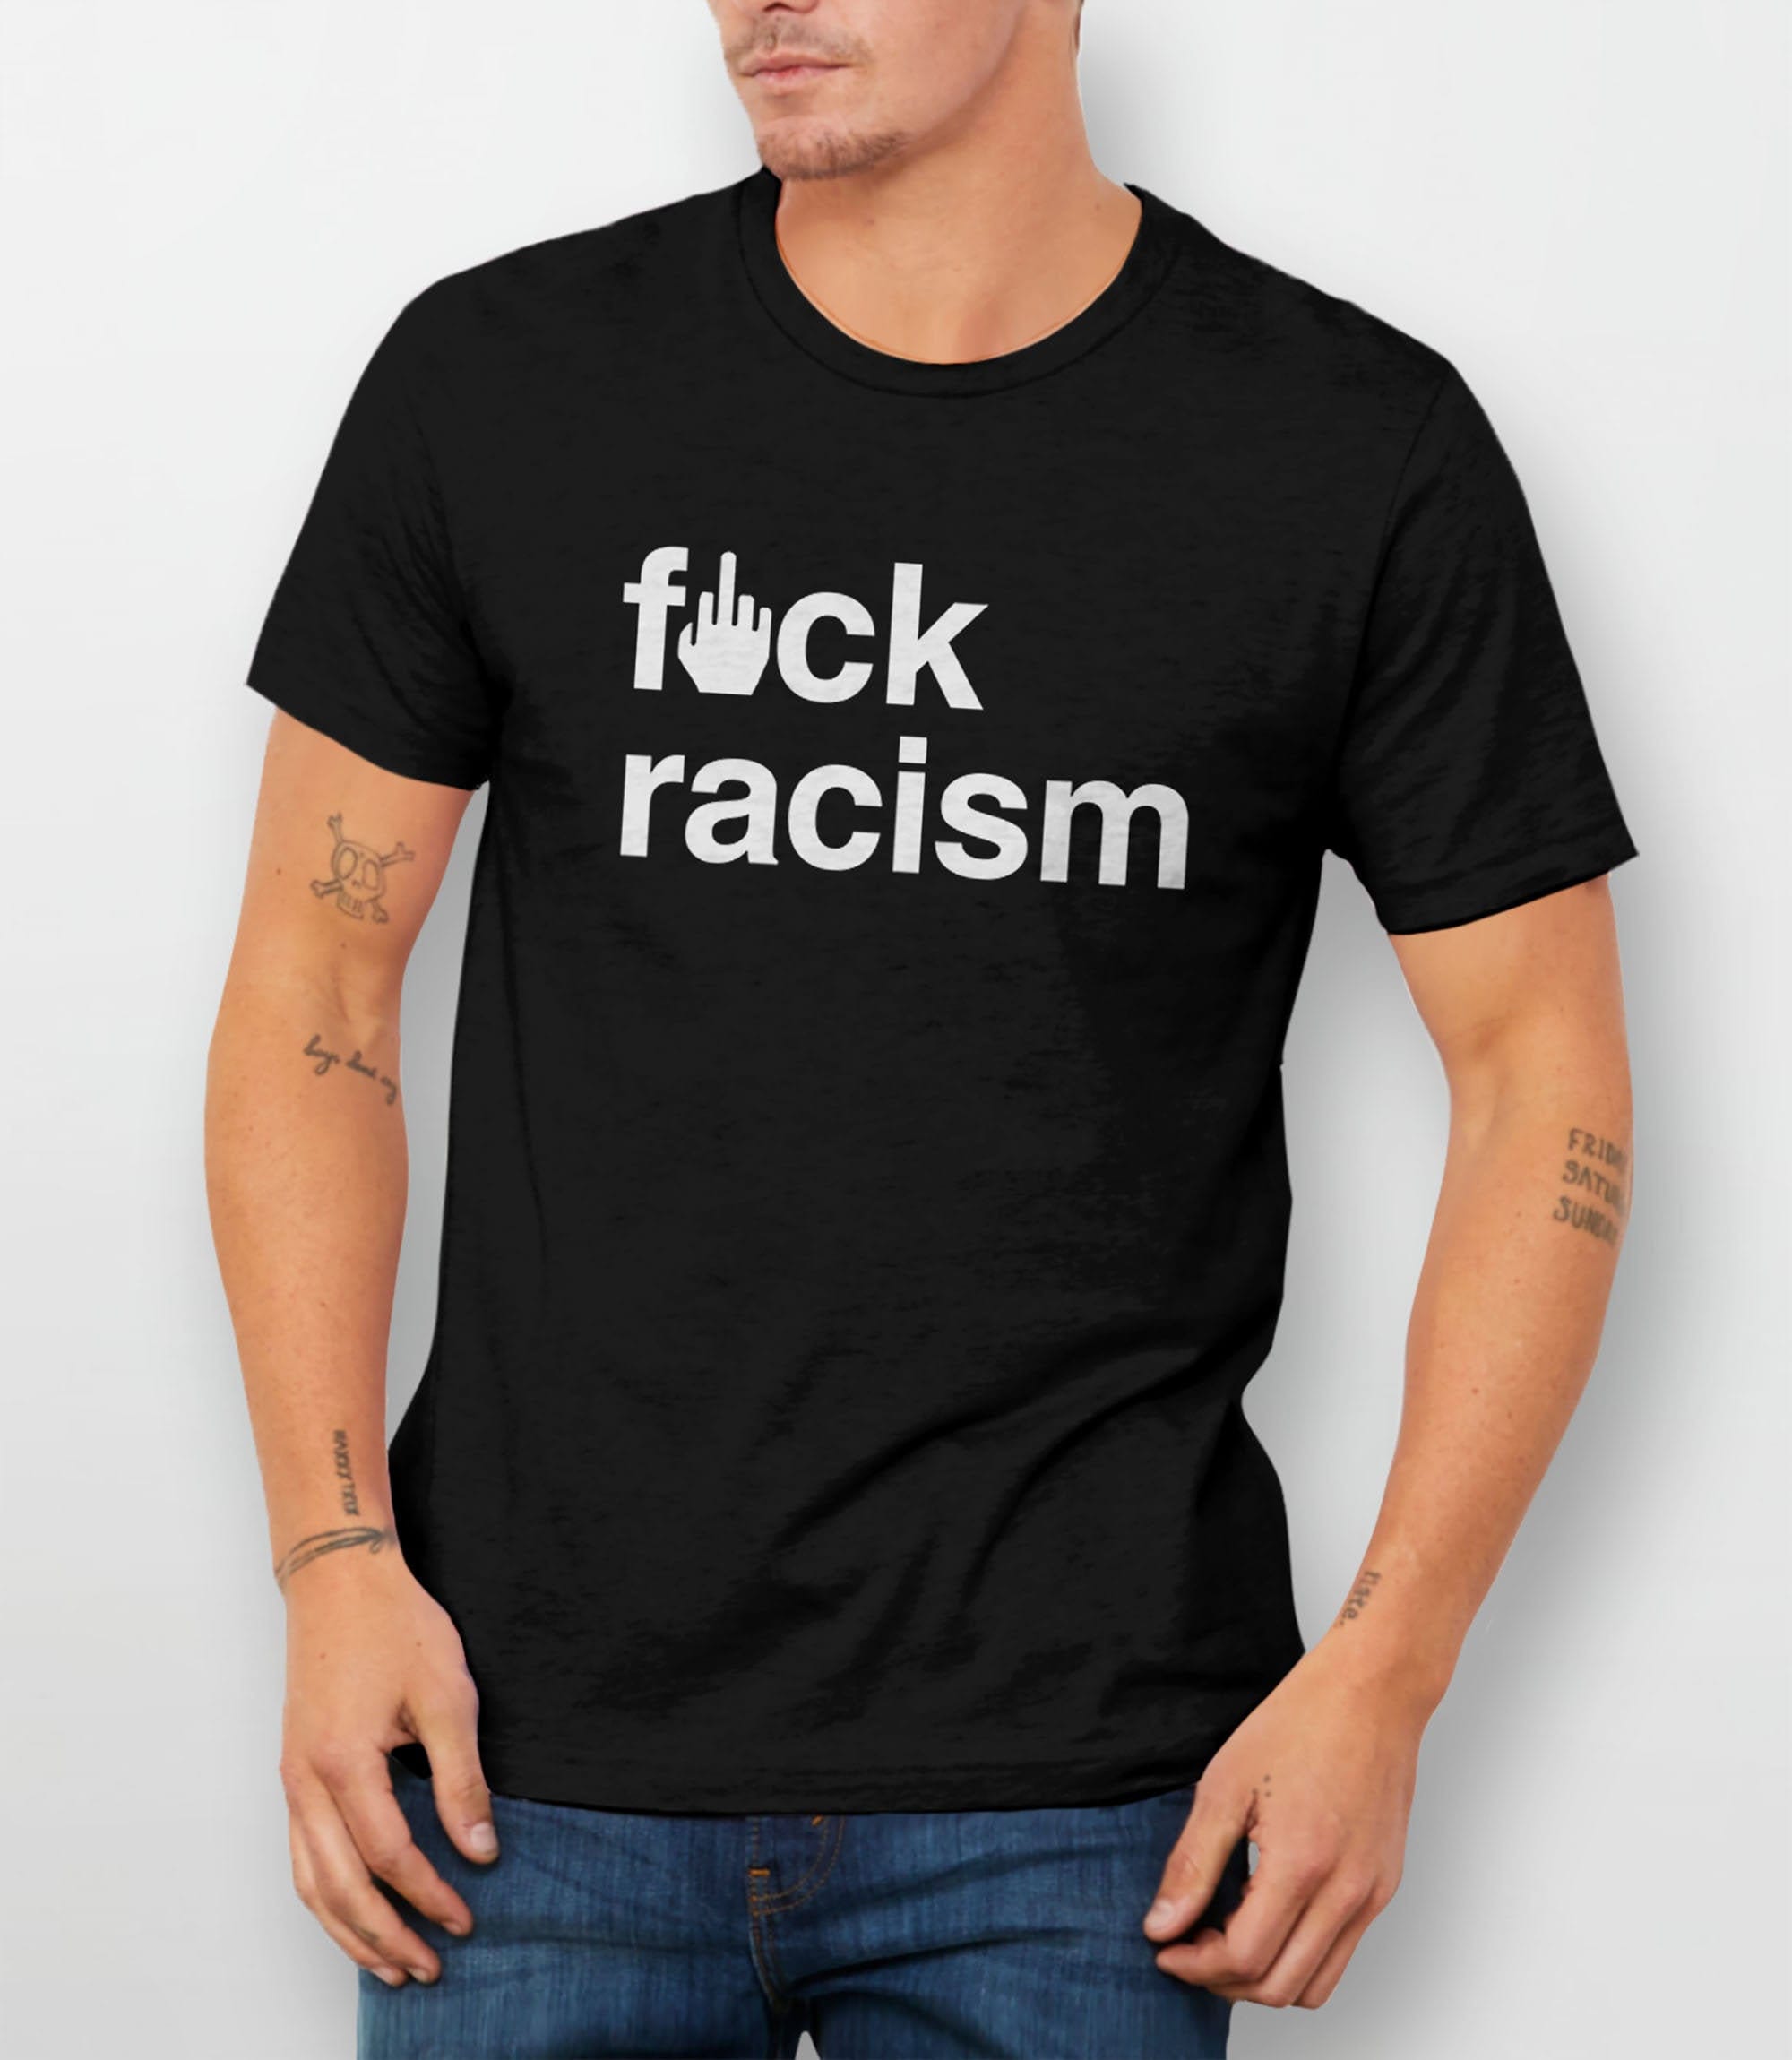 Fuck Racism Shirt Stop Asian Hate Tee End Hate Shirt Anti photo pic